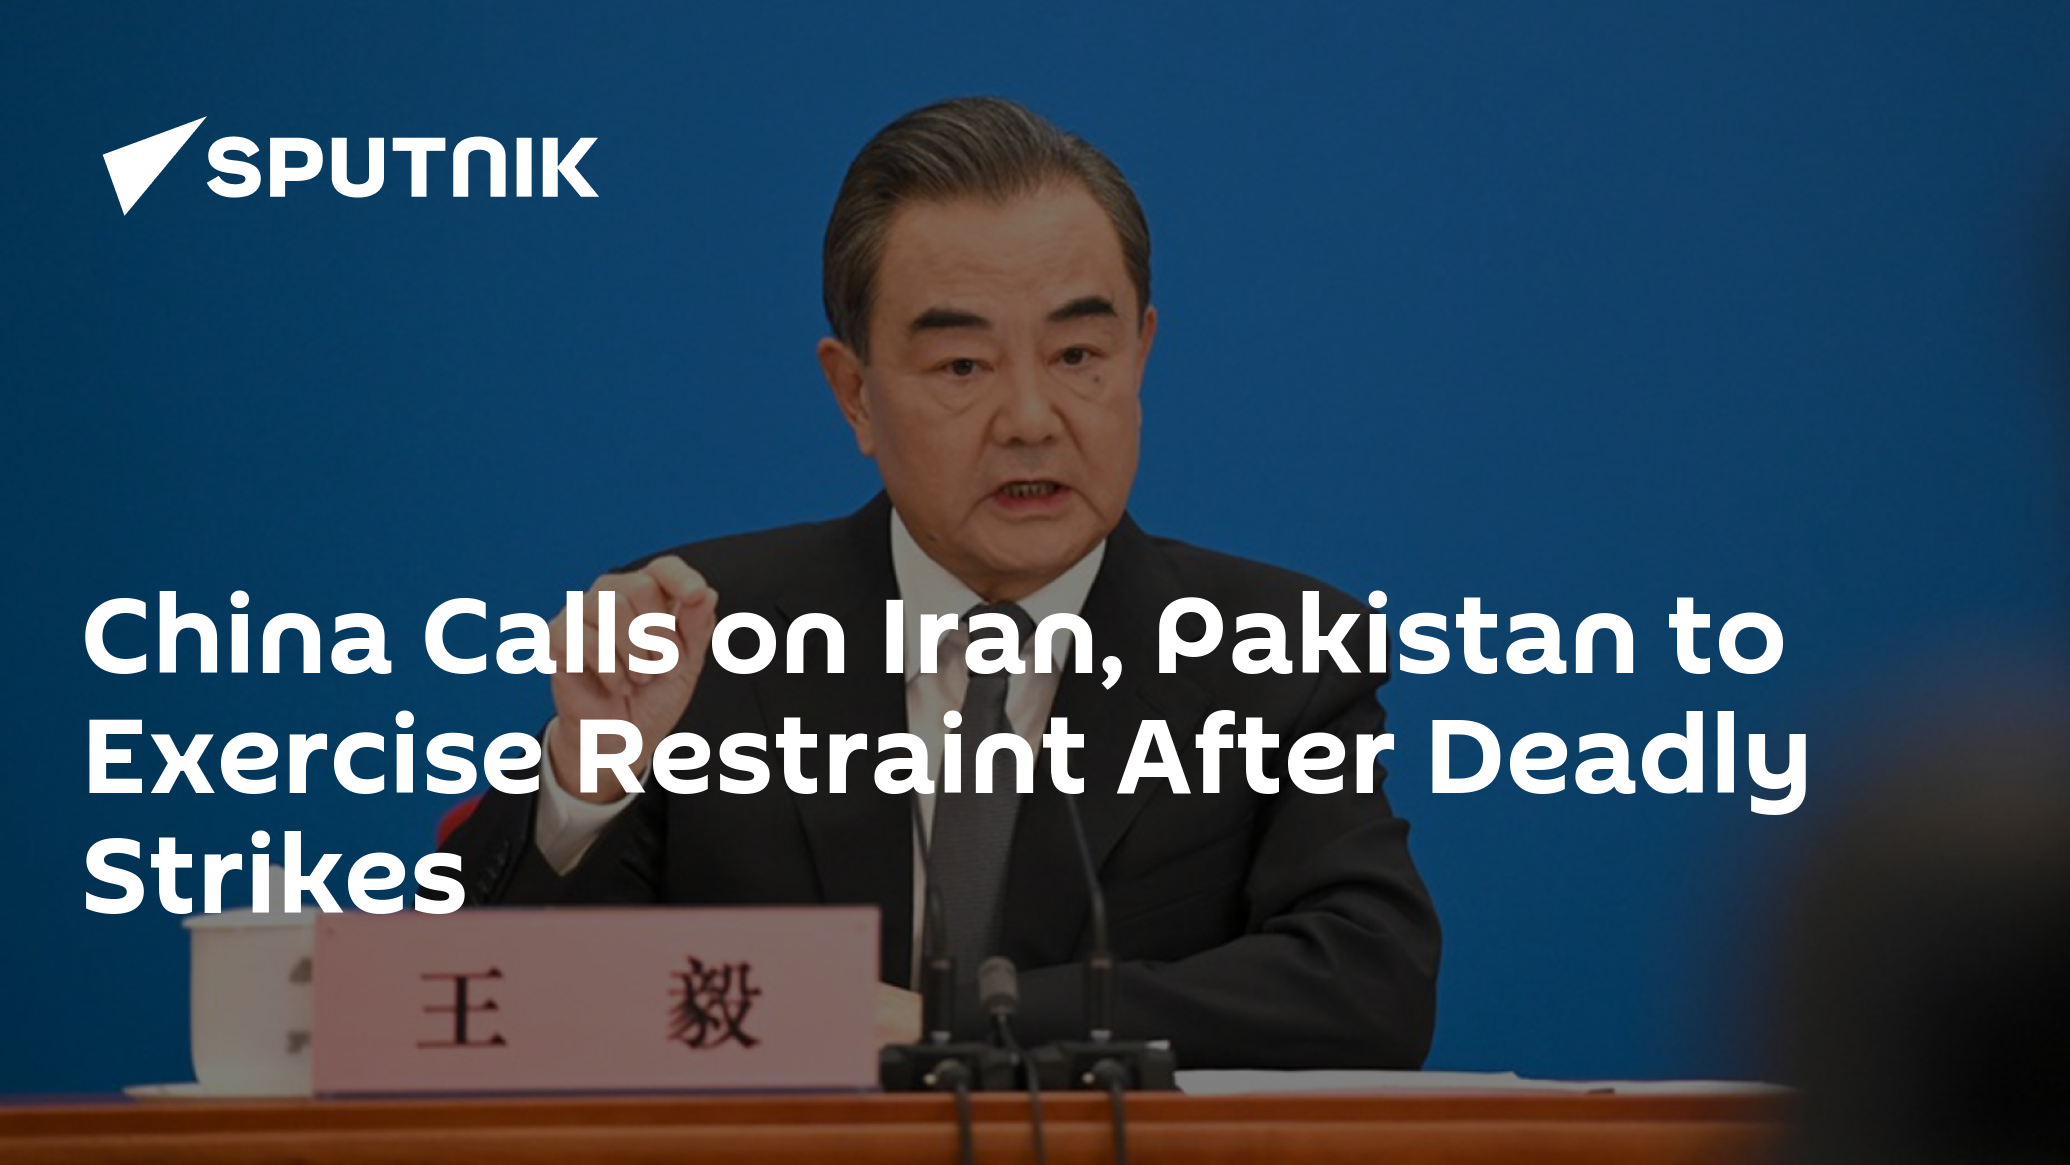 China Calls on Iran, Pakistan to Exercise Restraint After Deadly Strikes